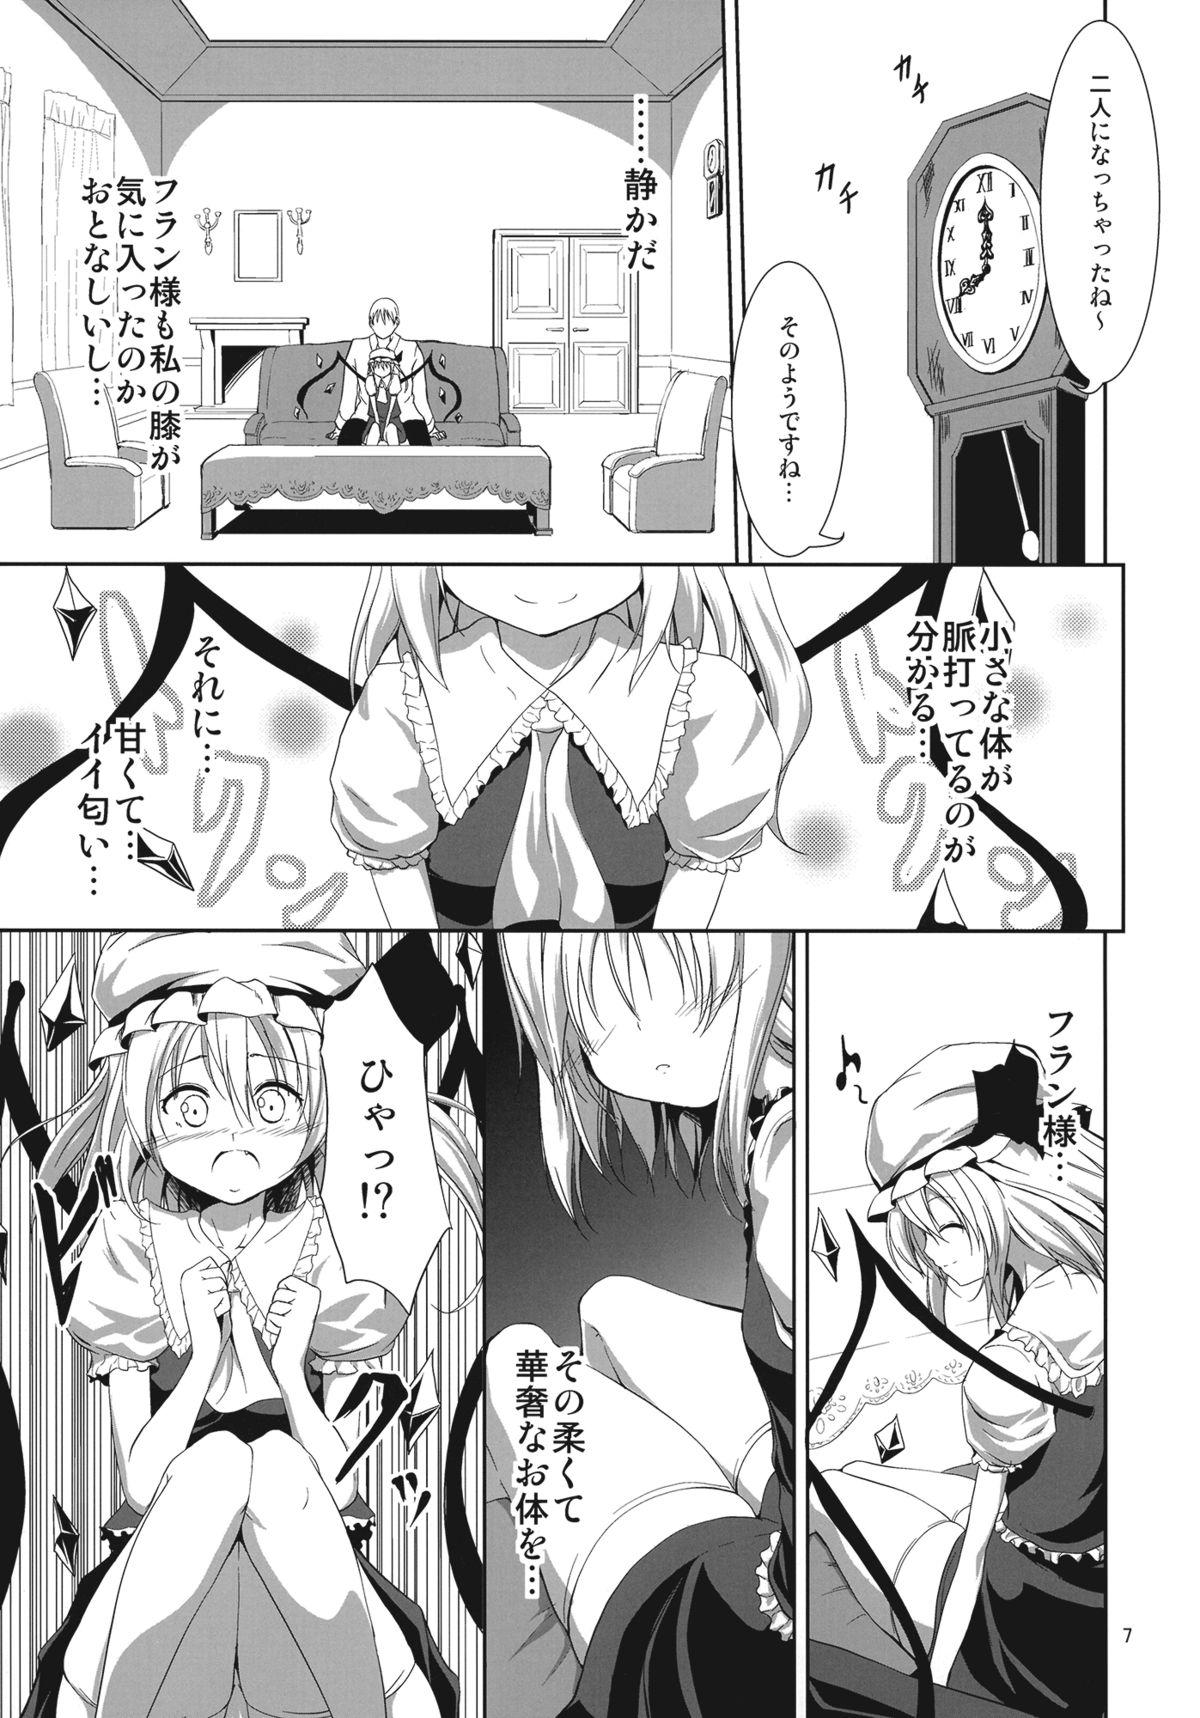 Made kiss mark - Touhou project Love Making - Page 7